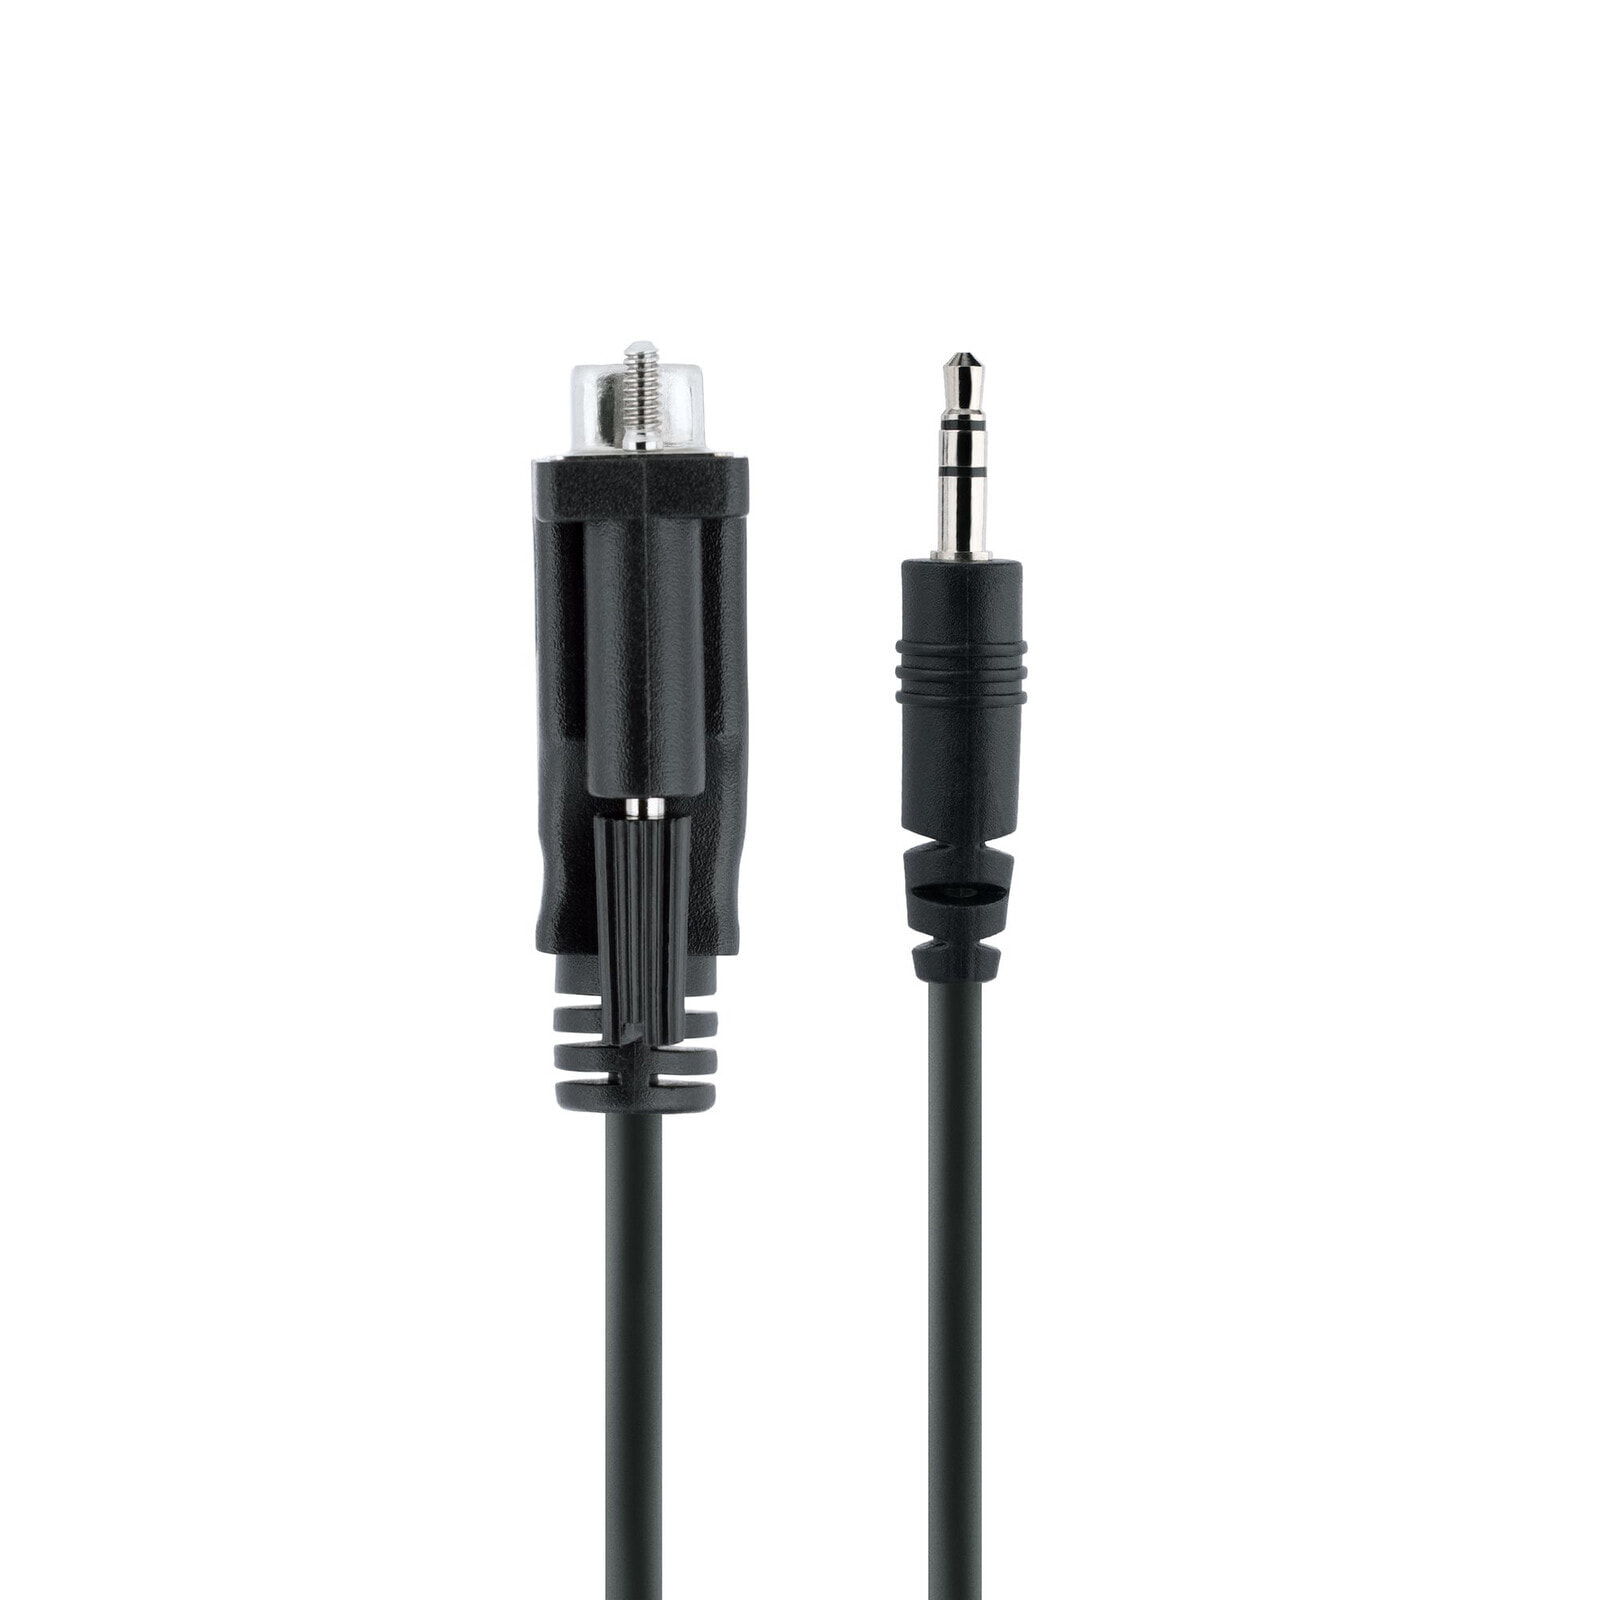 StarTech.com 3ft (1m) DB9 to 3.5mm Serial Cable for Serial Device Configuration - RS232 DB9 Male to 3.5mm Cable Used for Calibrating Projectors - Digital Signage - TVs via Audio Jack - DB-9 - 3.5mm - 1 m - Black